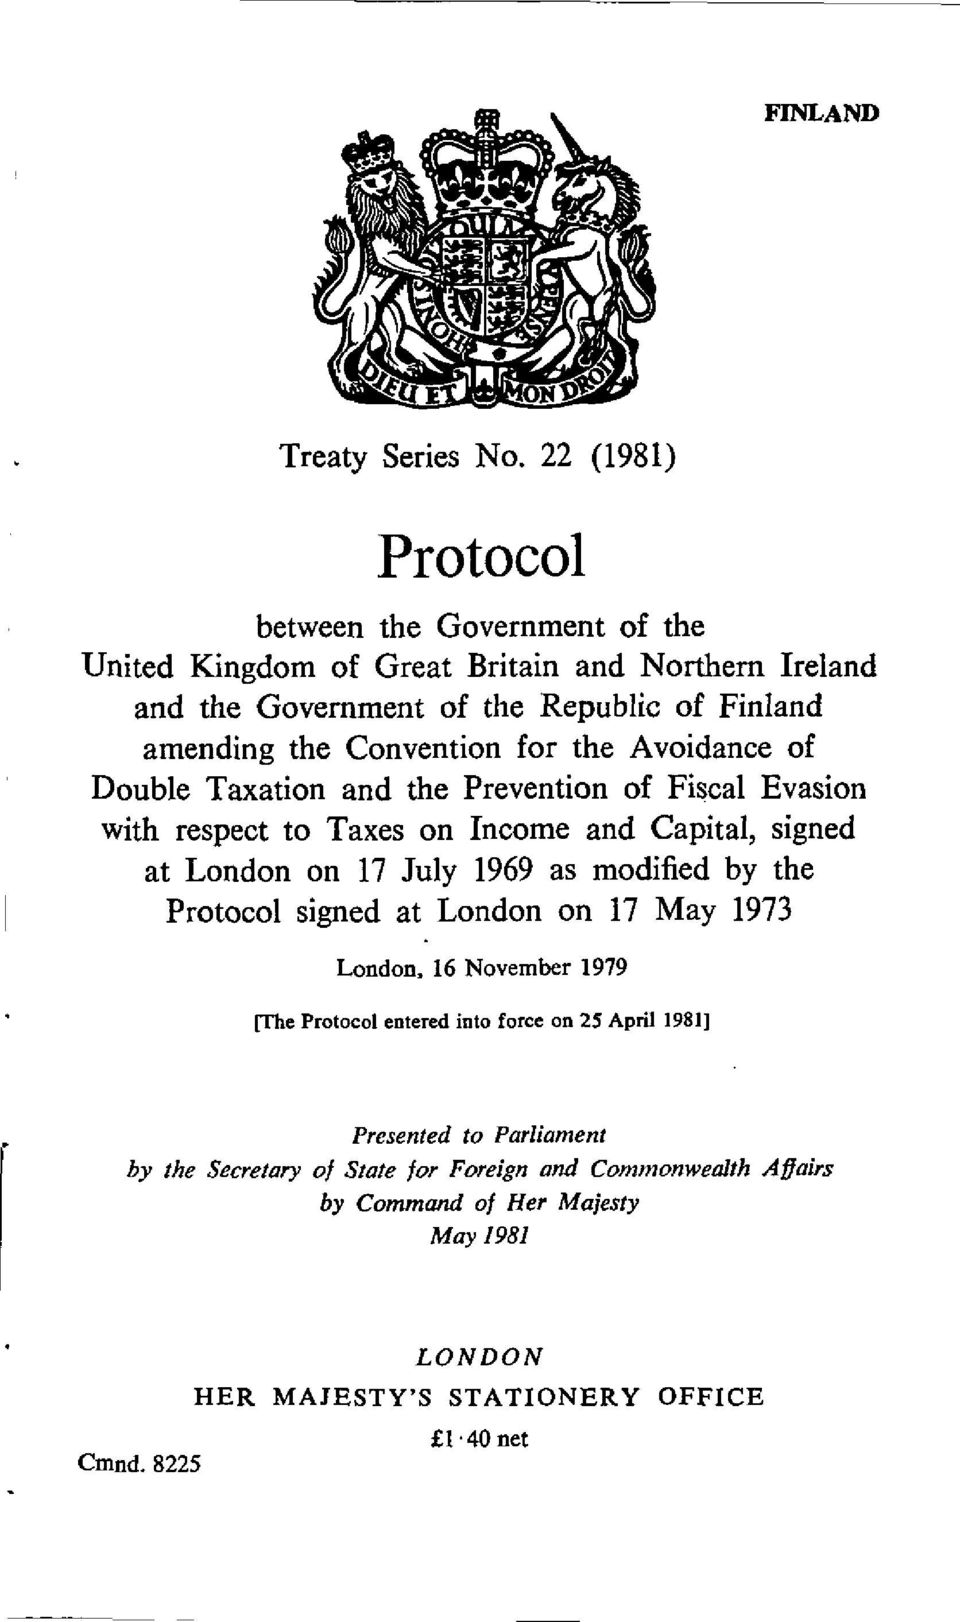 Convention for the Avoidance of Double Taxation and the Prevention of Fiscal Evasion with respect to Taxes on Income and Capital, signed at London on 17 July 1969 as